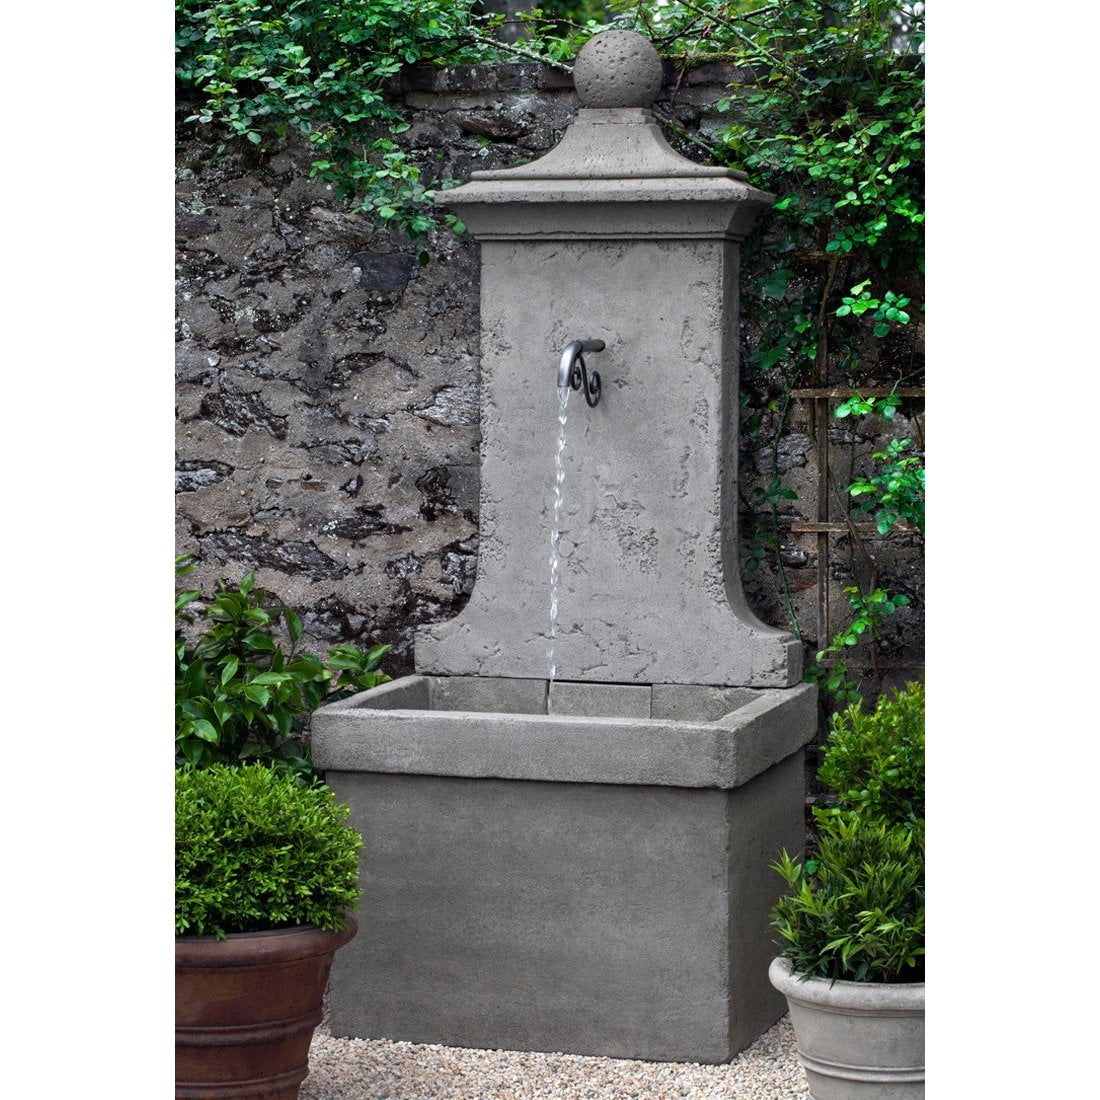 Vence Wall Fountain in Cast Stone by Campania International FT-312 - Majestic Fountains